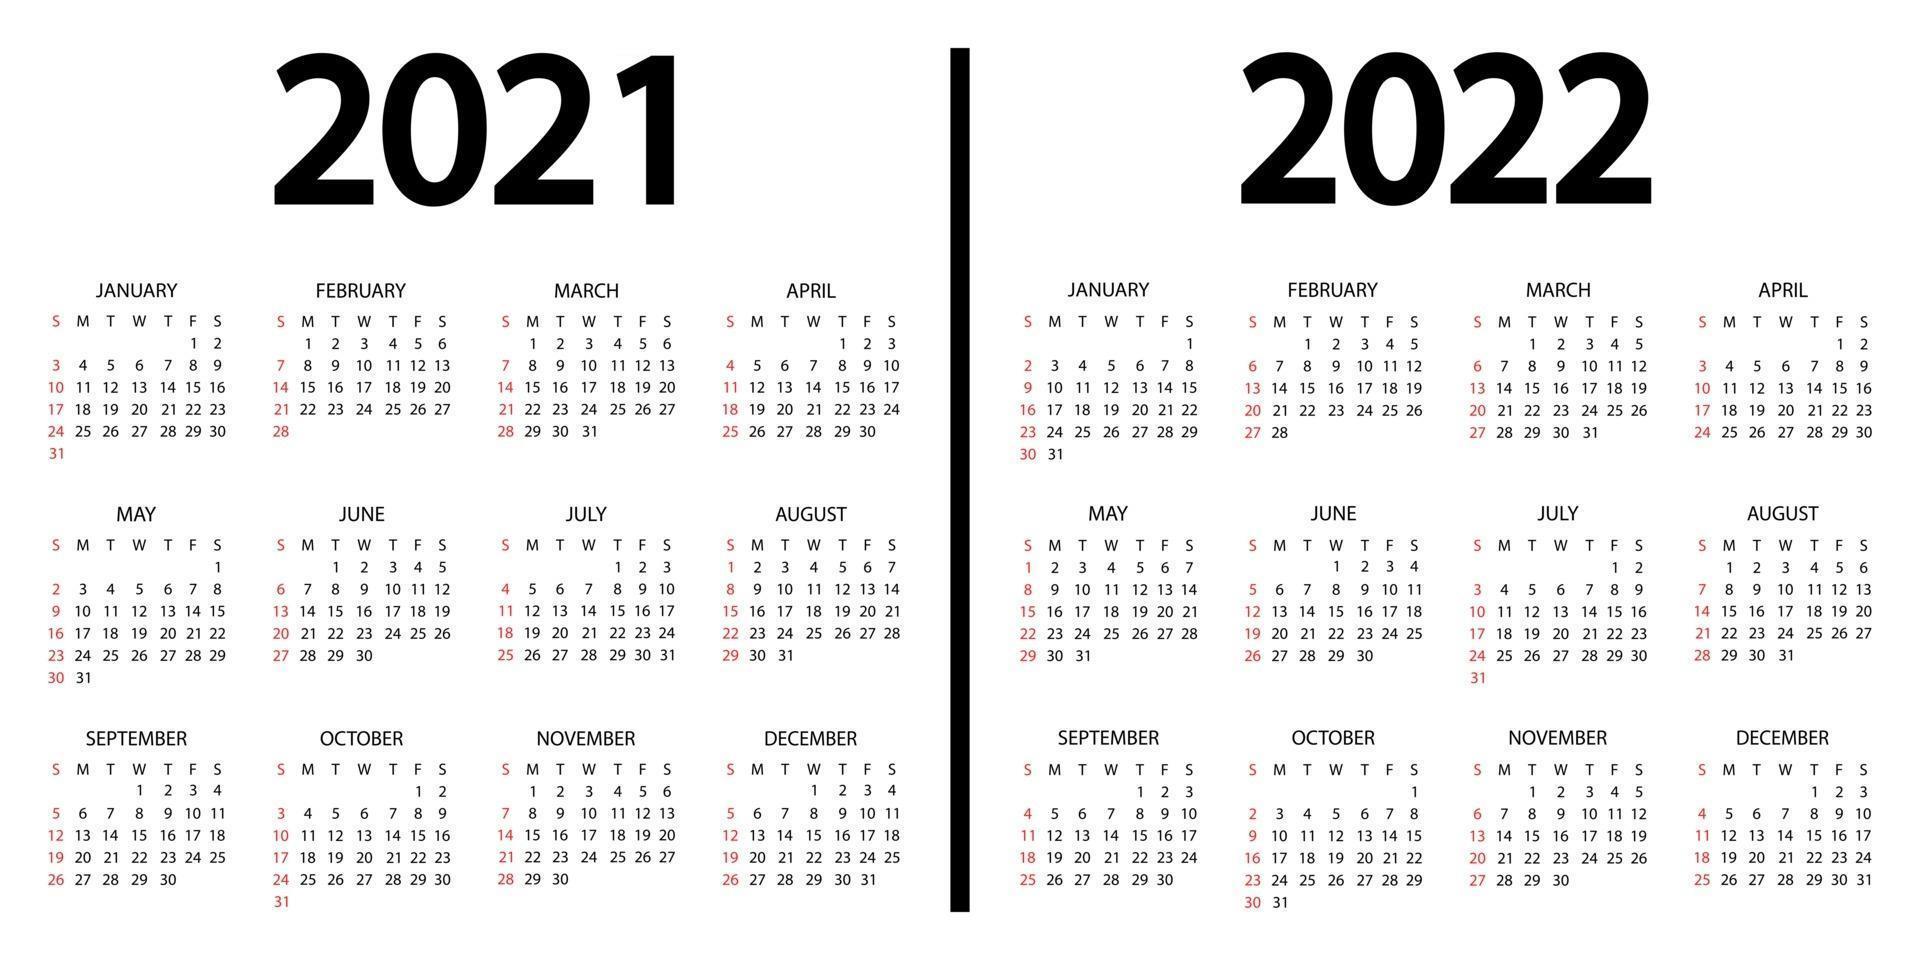 Calendar 2021 2022 The Week Starts On Sunday 2021 And 2022 Annual Calendar Template 12 Months Yearly Calendar Set In 2021 And 2022 Design In Black And White Colors Sunday In Red Colors 2659070 Vector Art At Vecteezy